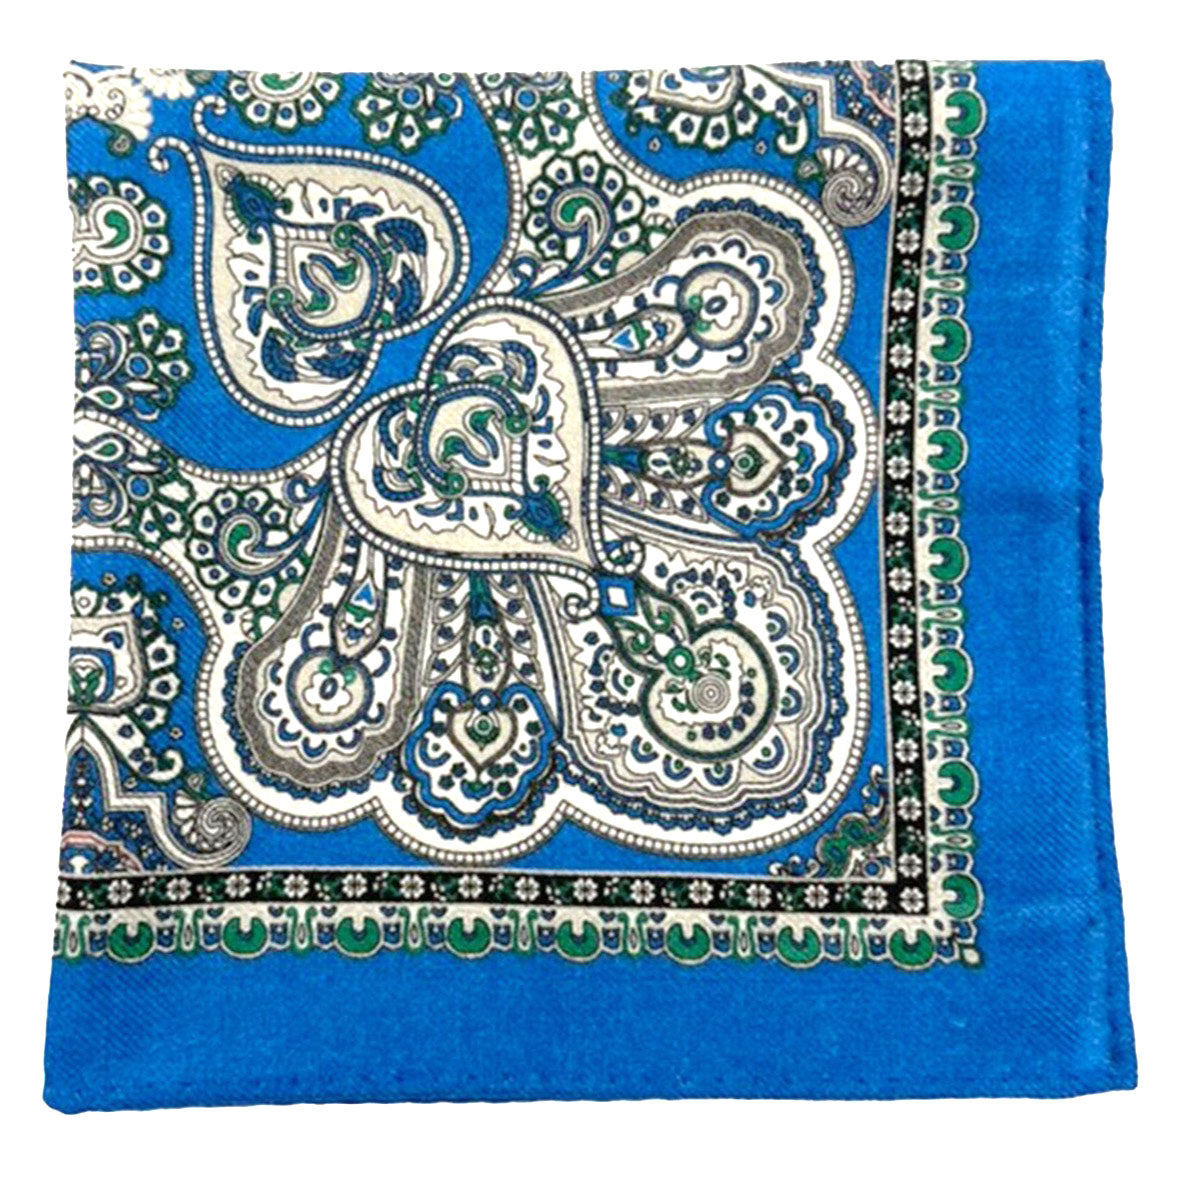 The 'Nomme' wool pocket square from SOHO Scarves folded into a quarter, showing the interlocking paisley patterns framed by a beautifully intricate green border.